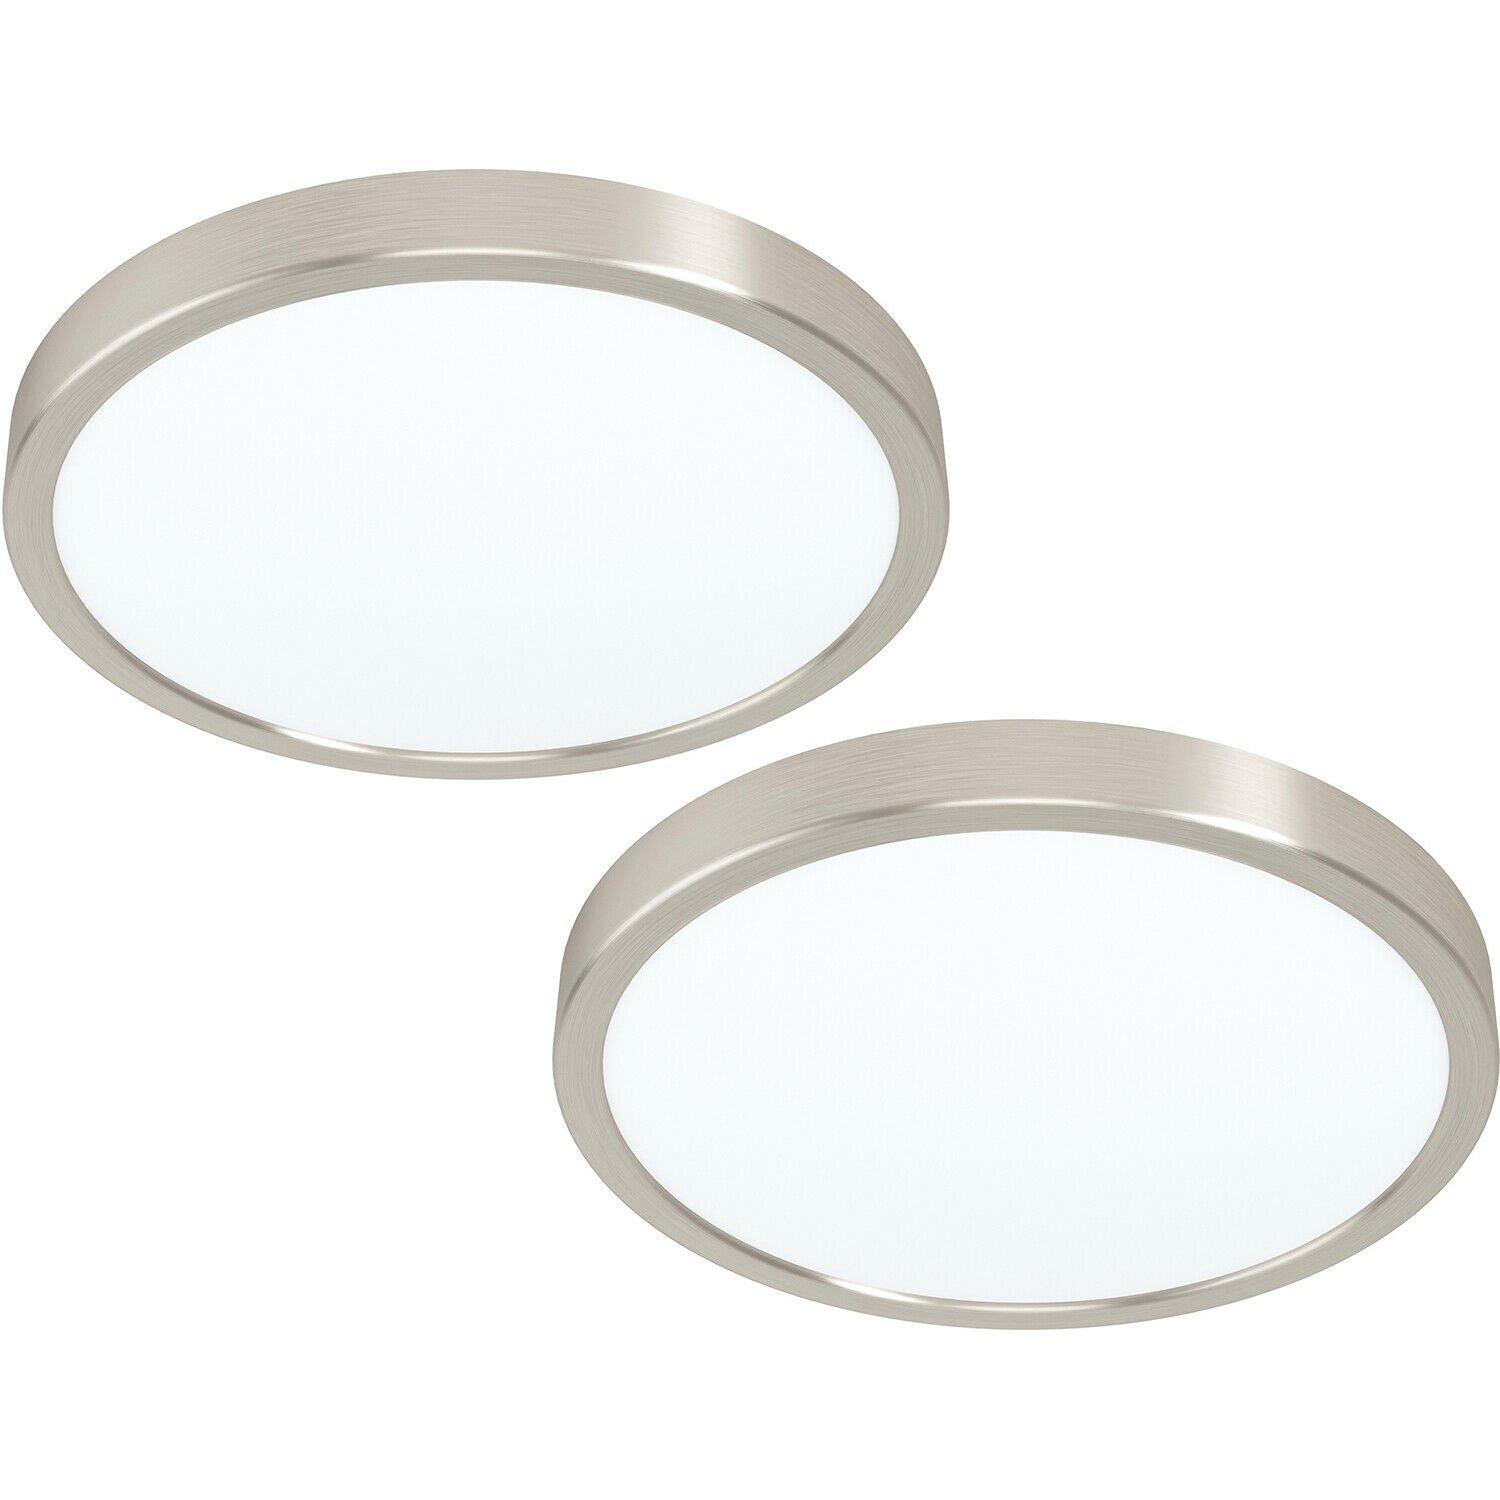 2 PACK Ceiling Light Satin Nickel 285mm Round Surface Mounted 20W LED 4000K